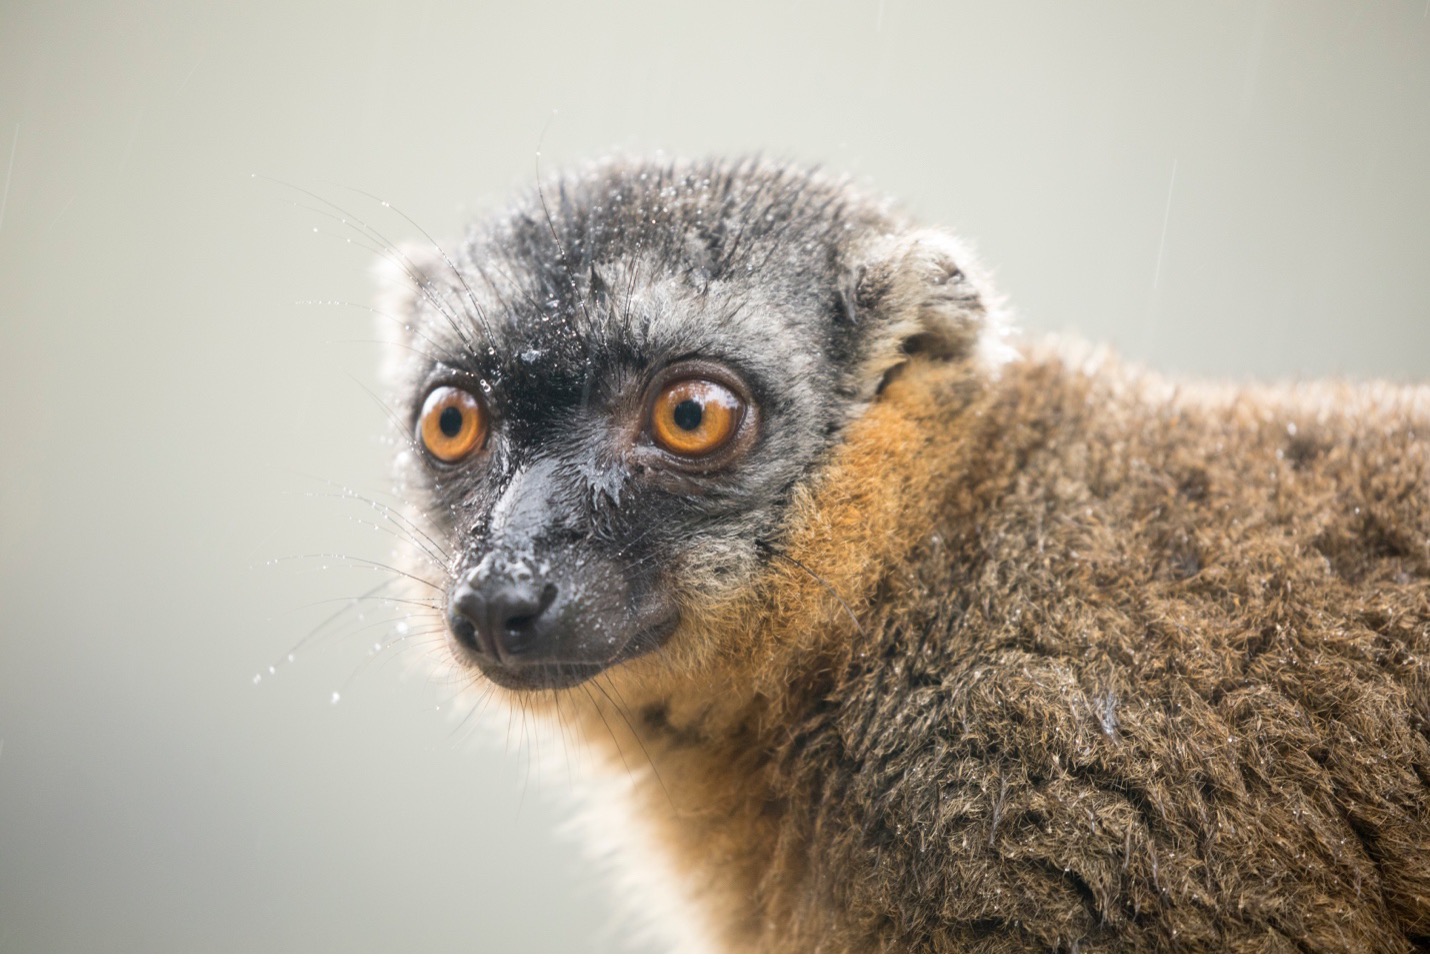 a brown lemur looks off in the distance with a nice blurry background